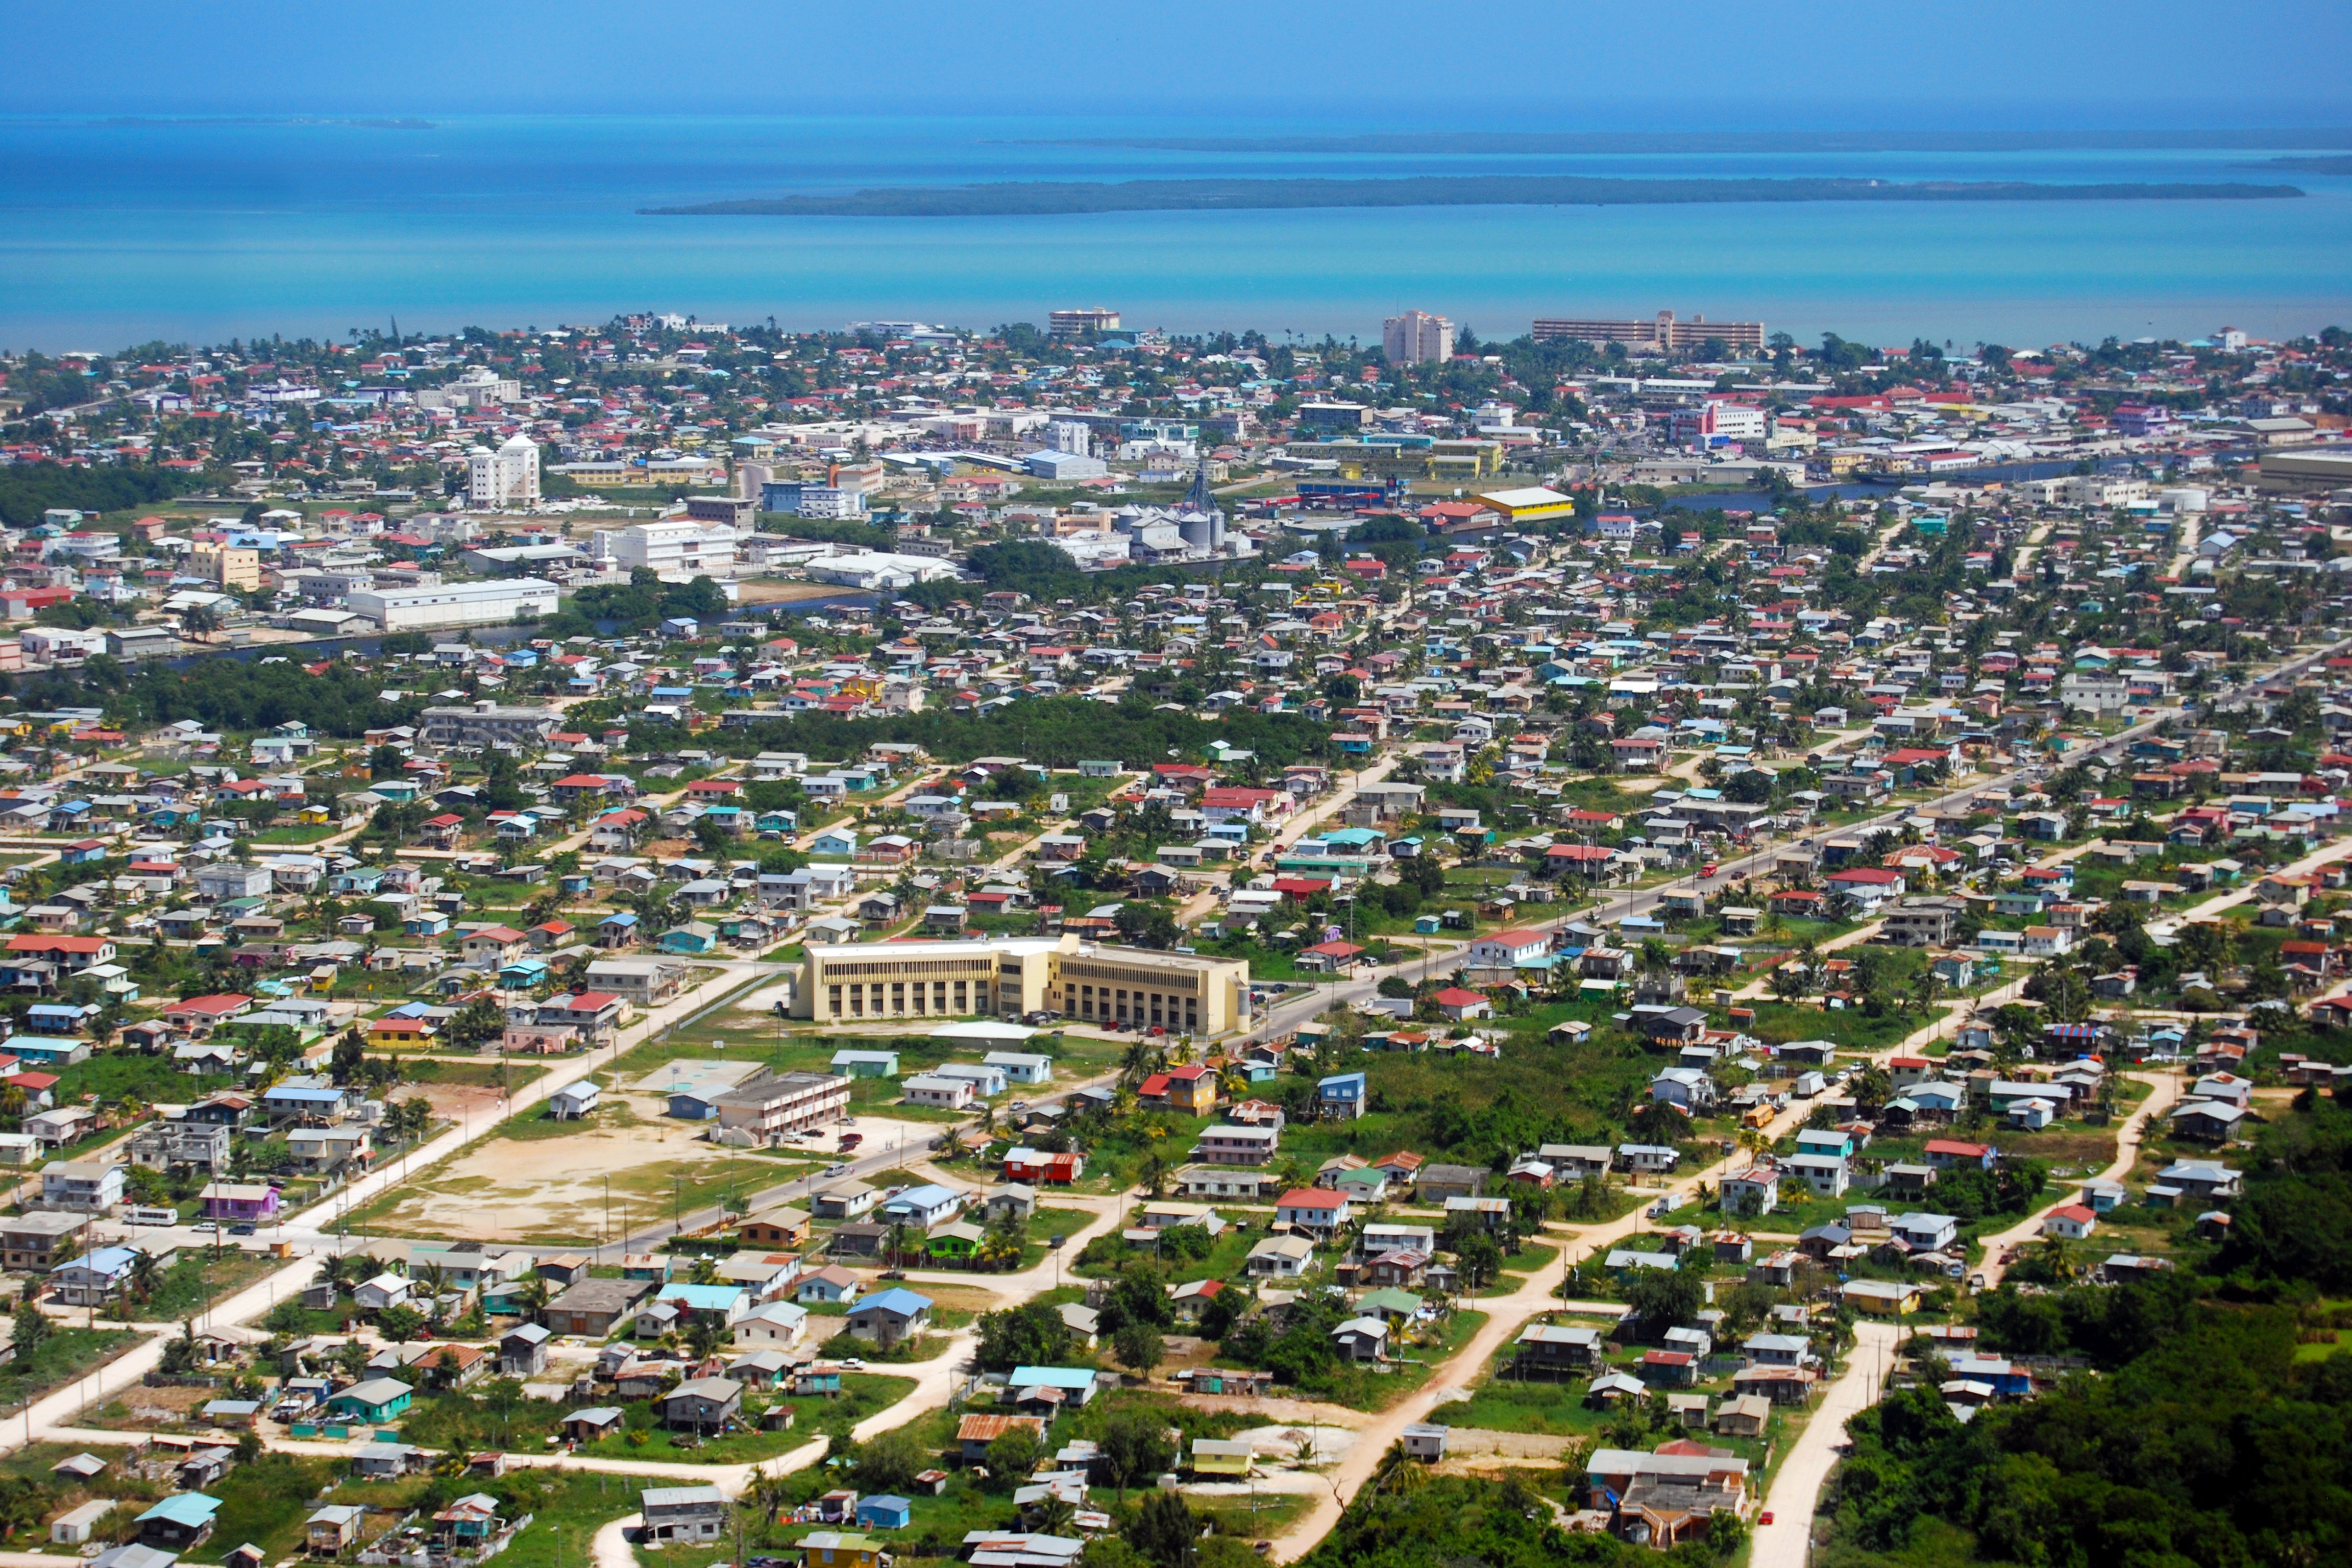 Life in Belize City is very different from the superyachts and luxury beachfront hotels just a few miles away